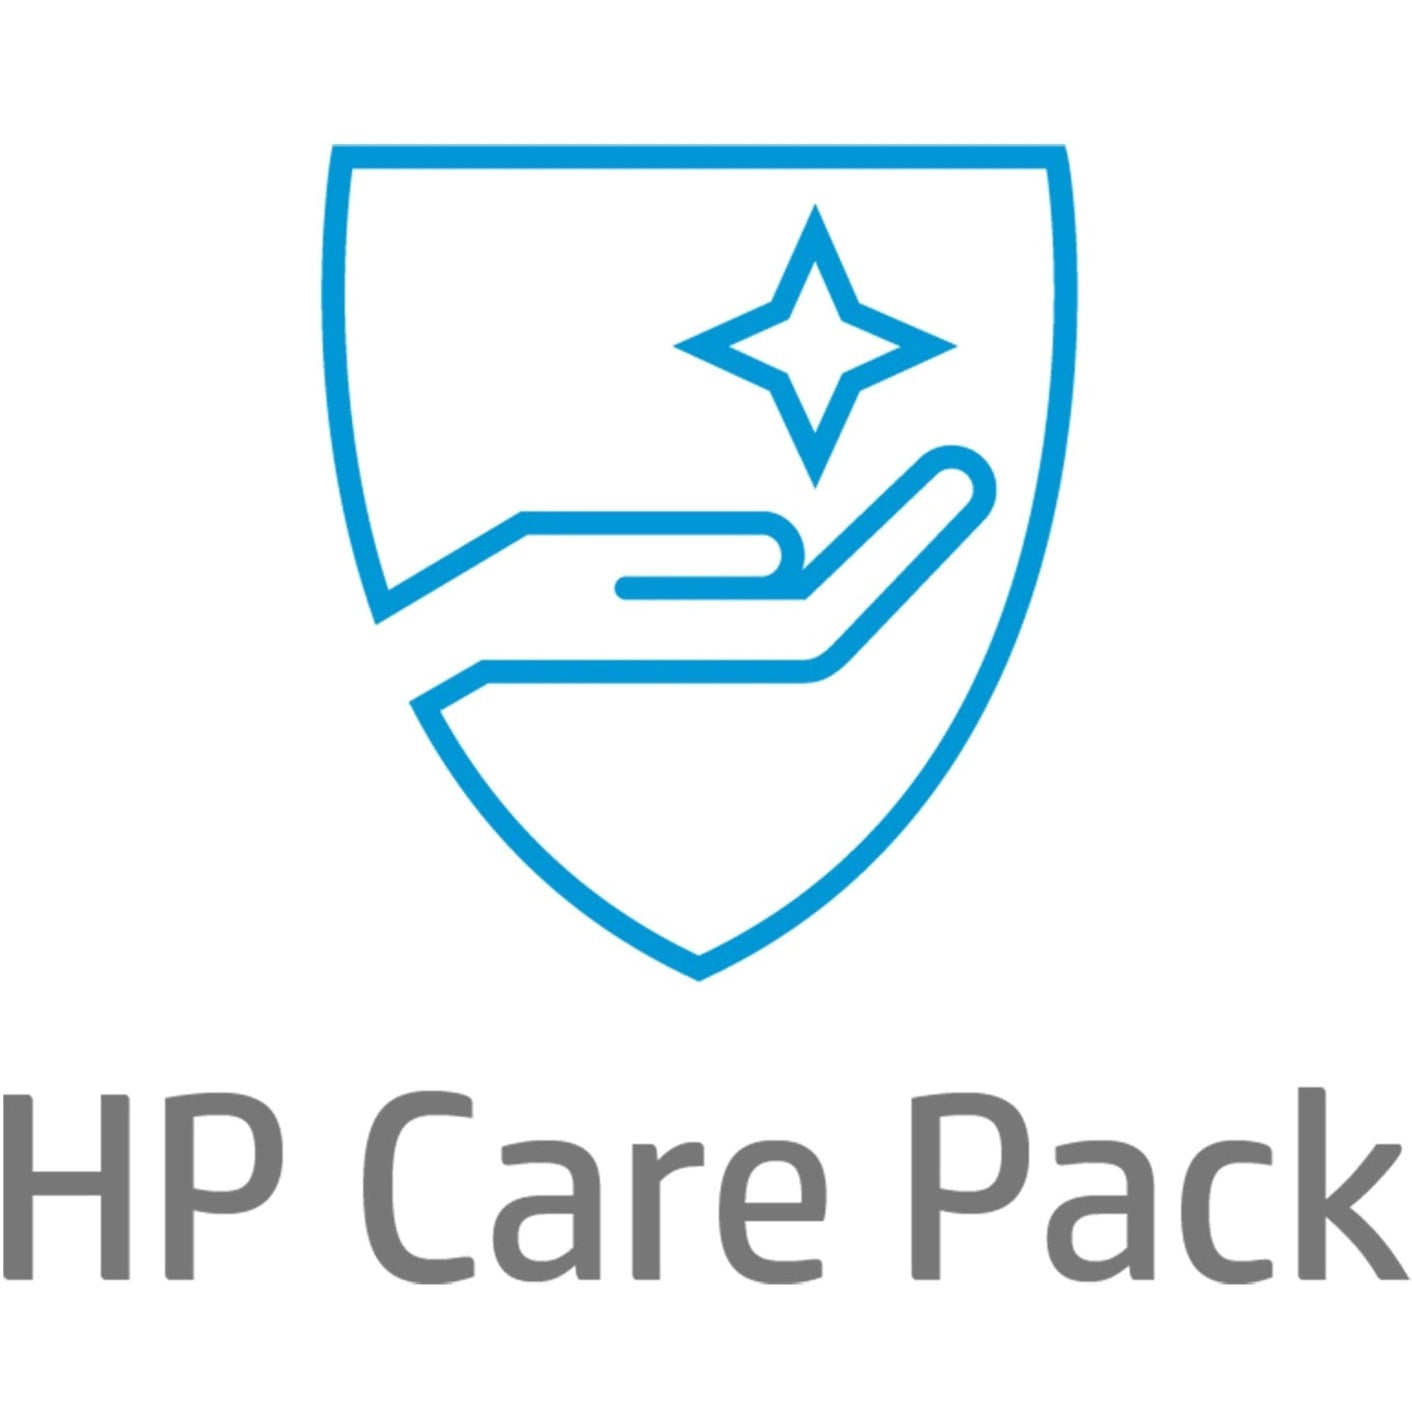 HP Care Pack Hardware Support - 2 Year - Warranty (U9DP7E)